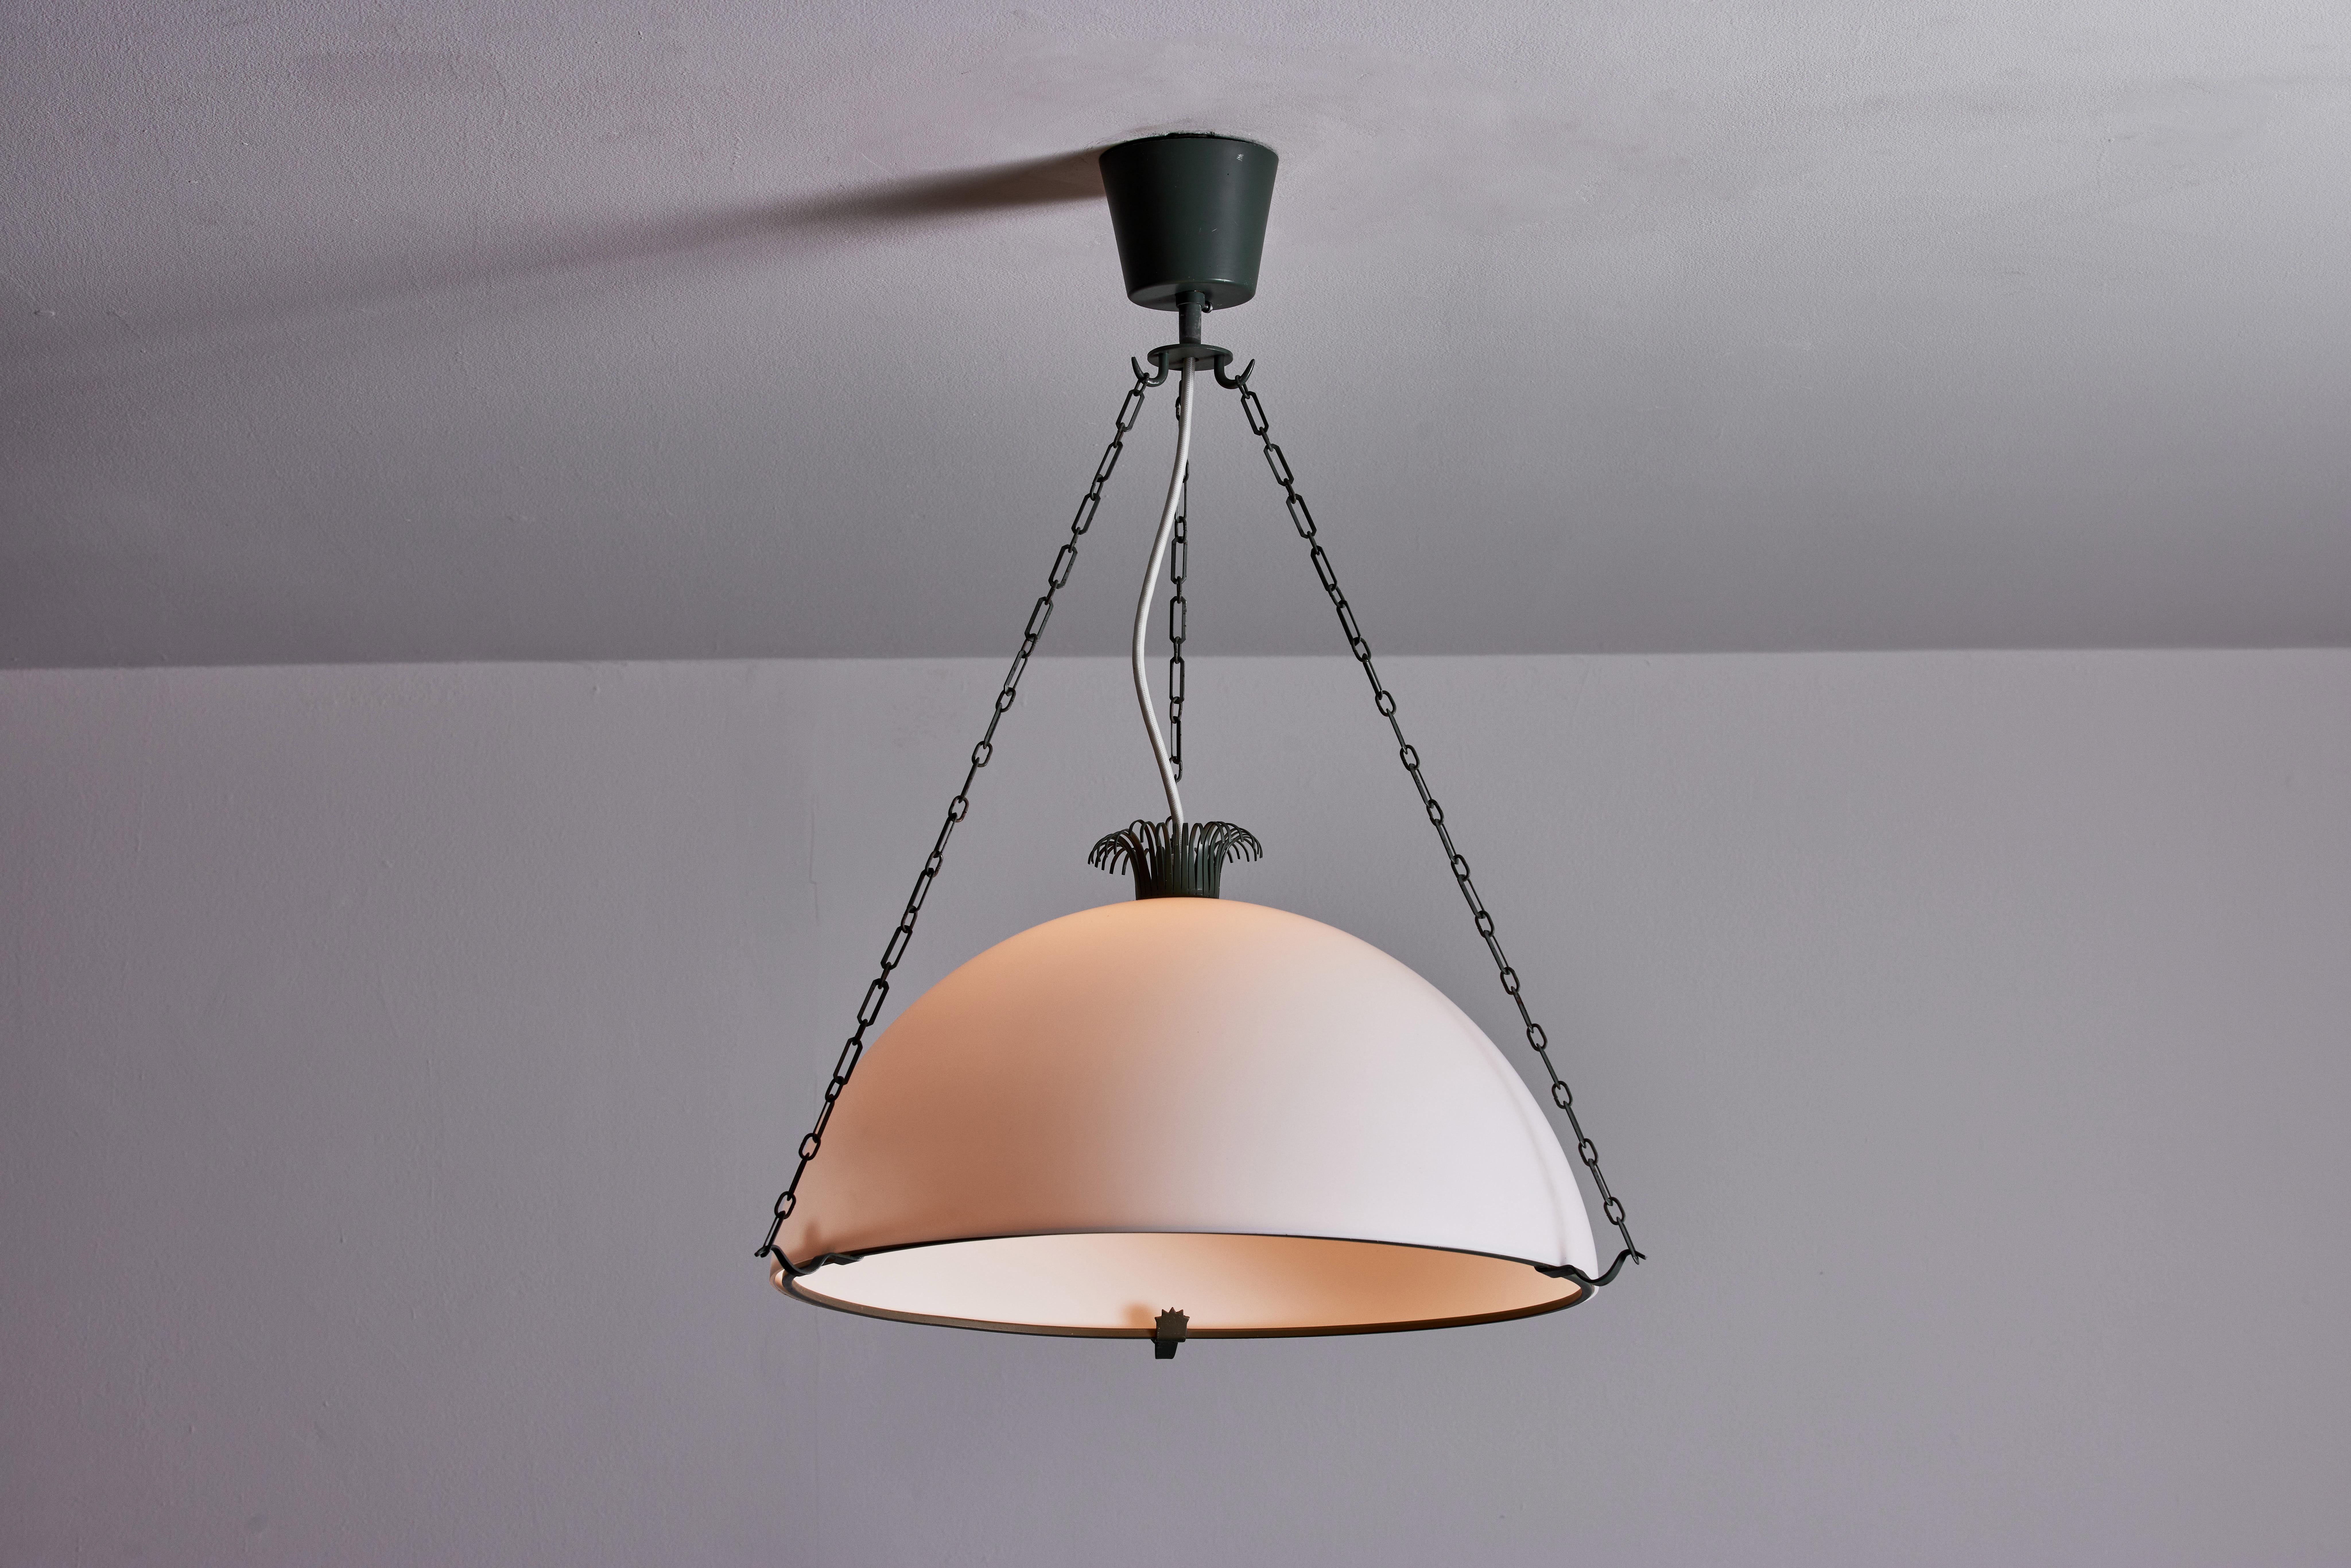 Rare parachute suspension light by Erik Gunnar Asplund. Designed and manufactured in Sweden, circa mid-1920s to mid-1930s. Enameled metal armature and chain, brushed satin glass diffuser. Rewired for U.S. junction boxes. Takes one E27 100w maximum